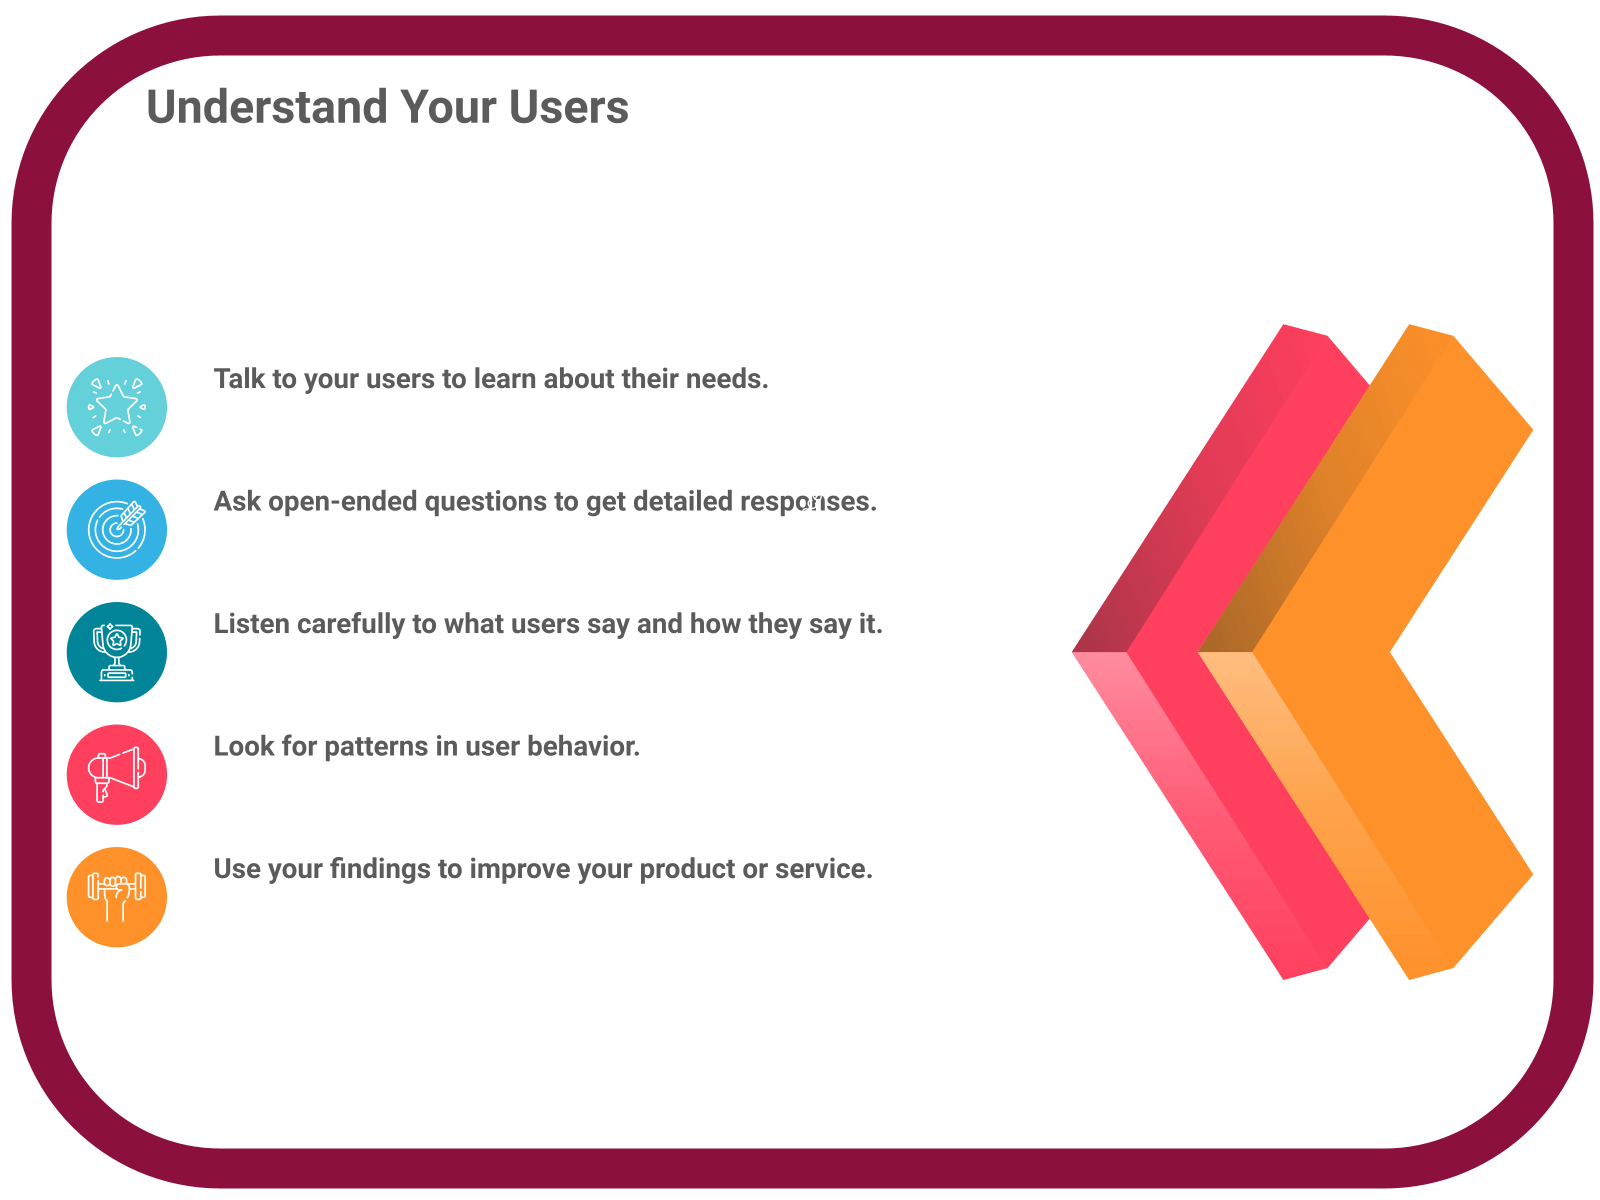 INFOGRAPHIC: Understand your users - Poll the People